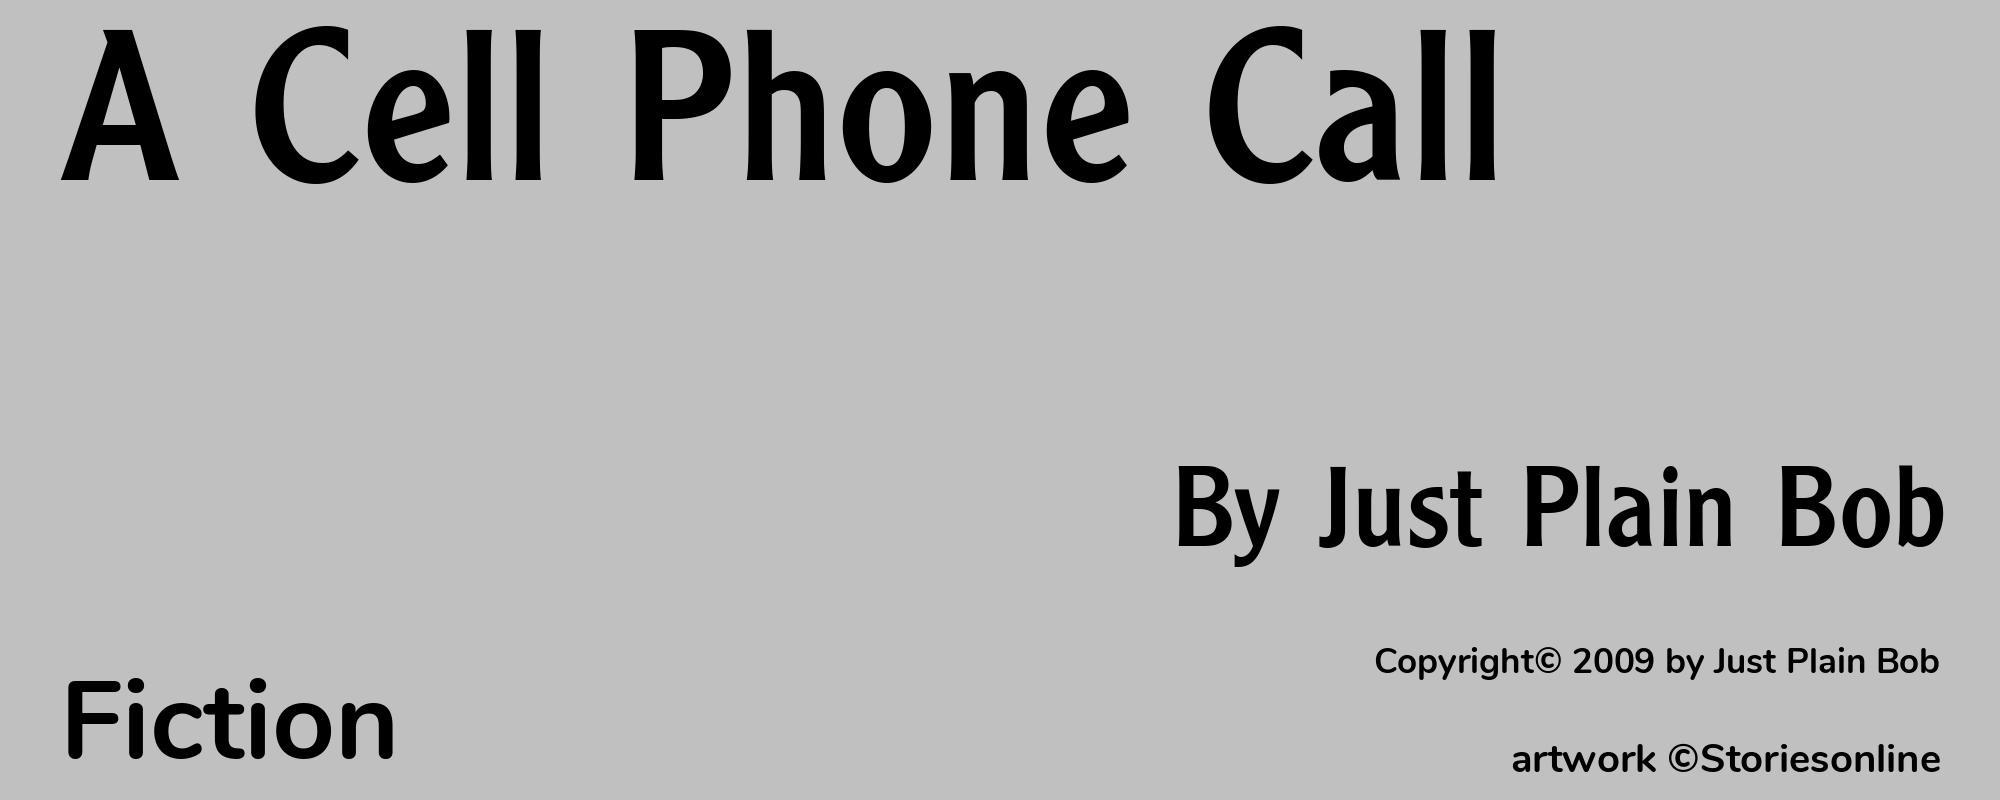 A Cell Phone Call - Cover